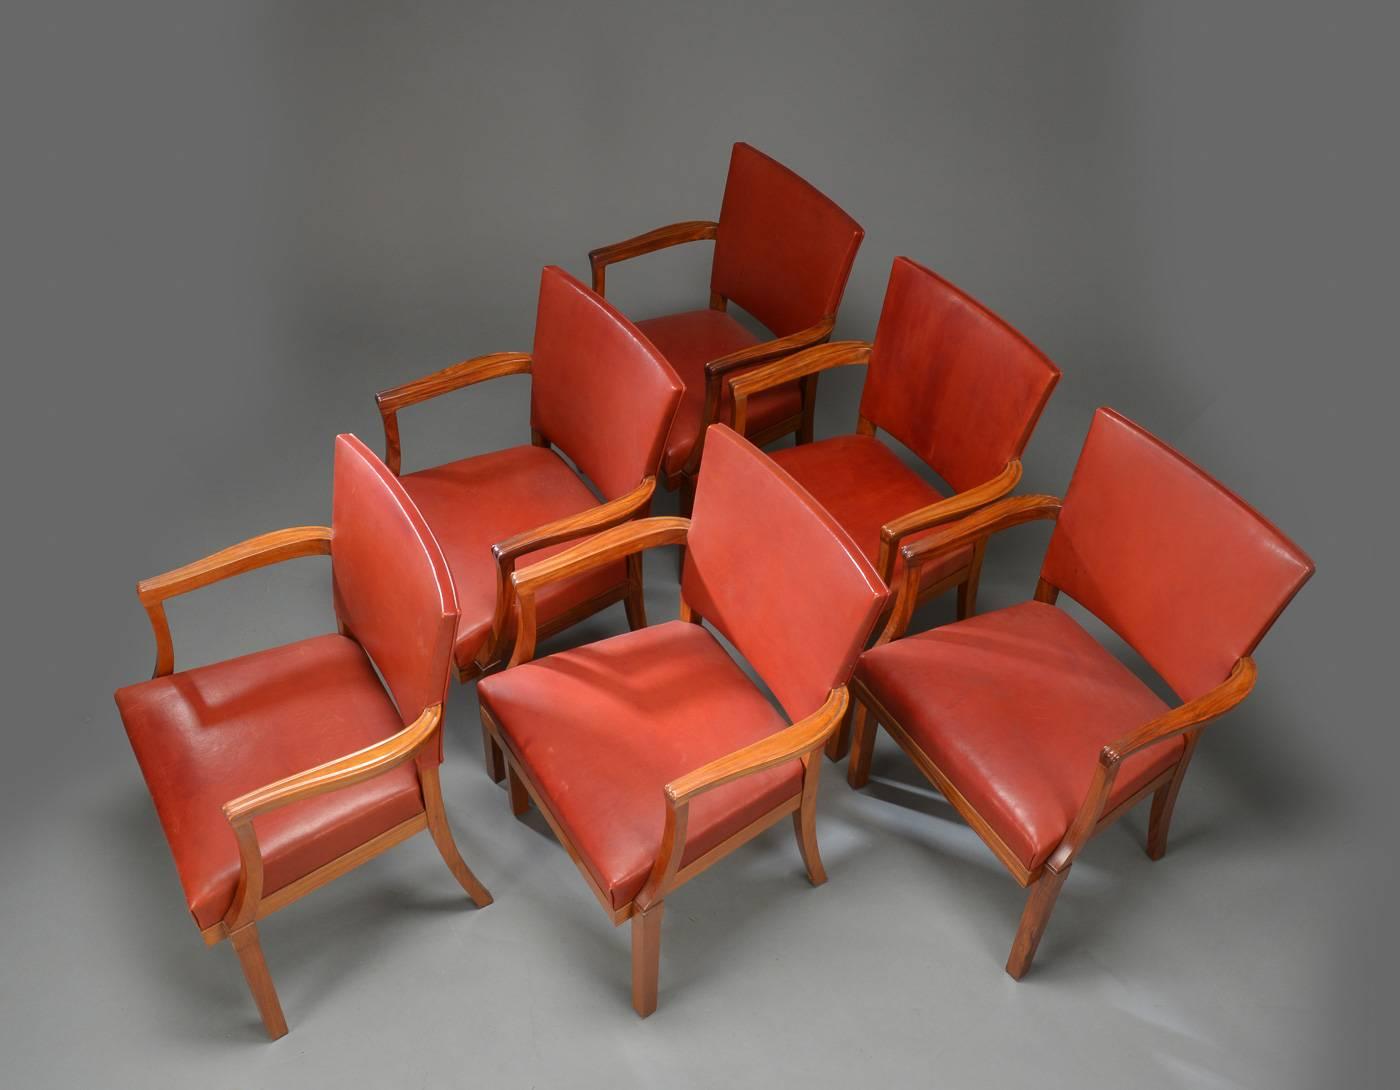 This set of six armchairs in mahogany, walnut and leather were made by Rud. Rasmussen in 1935. According to Rud Rasmussen, the chairs are one of several variants of Kaare Klint's Barcelona chair, made in small numbers by Rud Rasmussen in the 1930s.